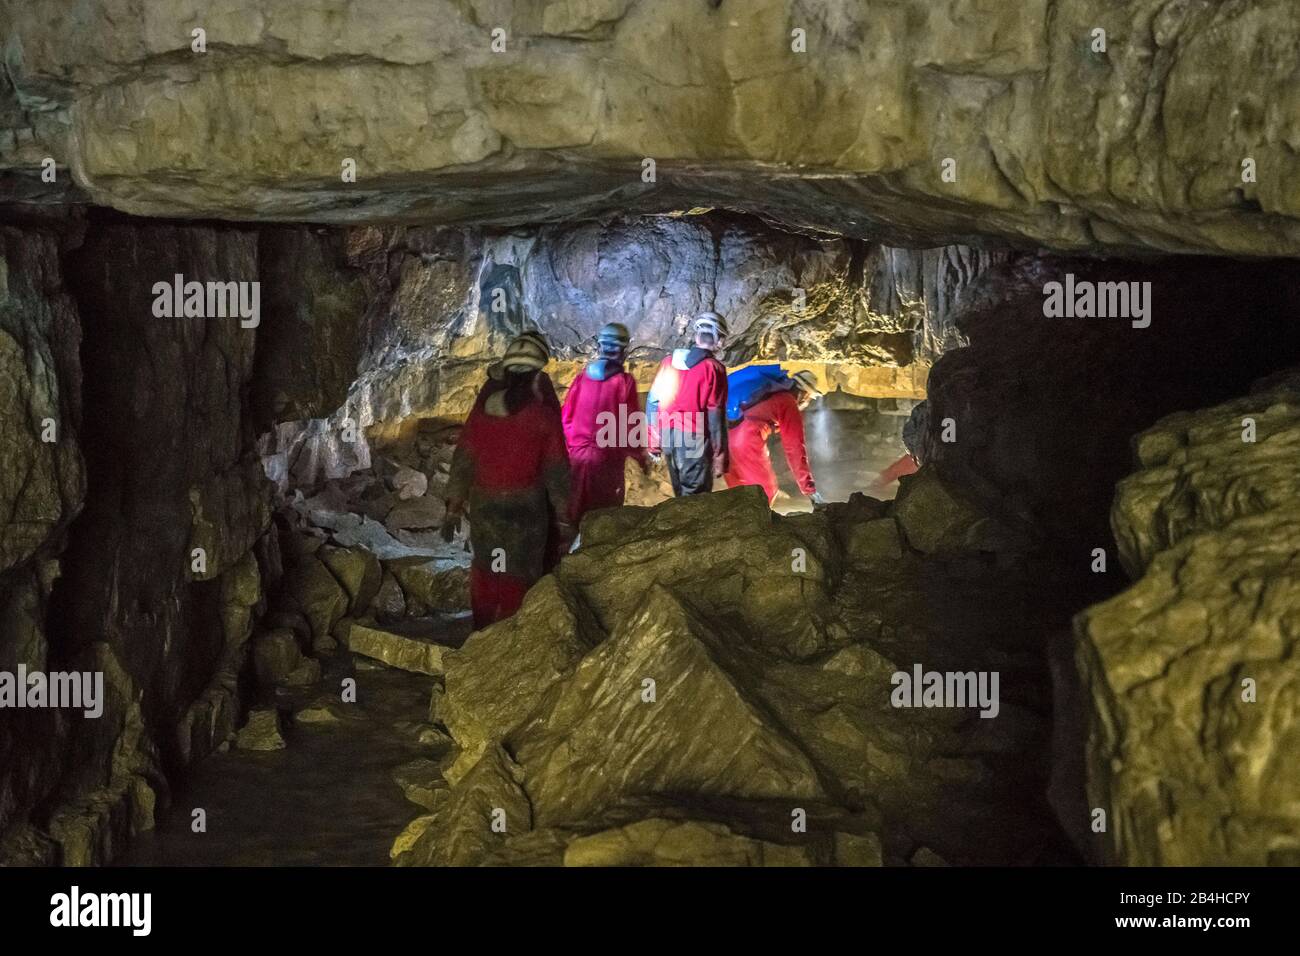 Germany, Baden-Württemberg, Bad Urach, cavers explore the Falkensteiner cave. It is a so-called 'wild cave', not a show cave, and is only accessible to tourists for a short while. In the novel 'Rulaman' by David Friedrich Weinland she is the Huhkahöhle. Stock Photo